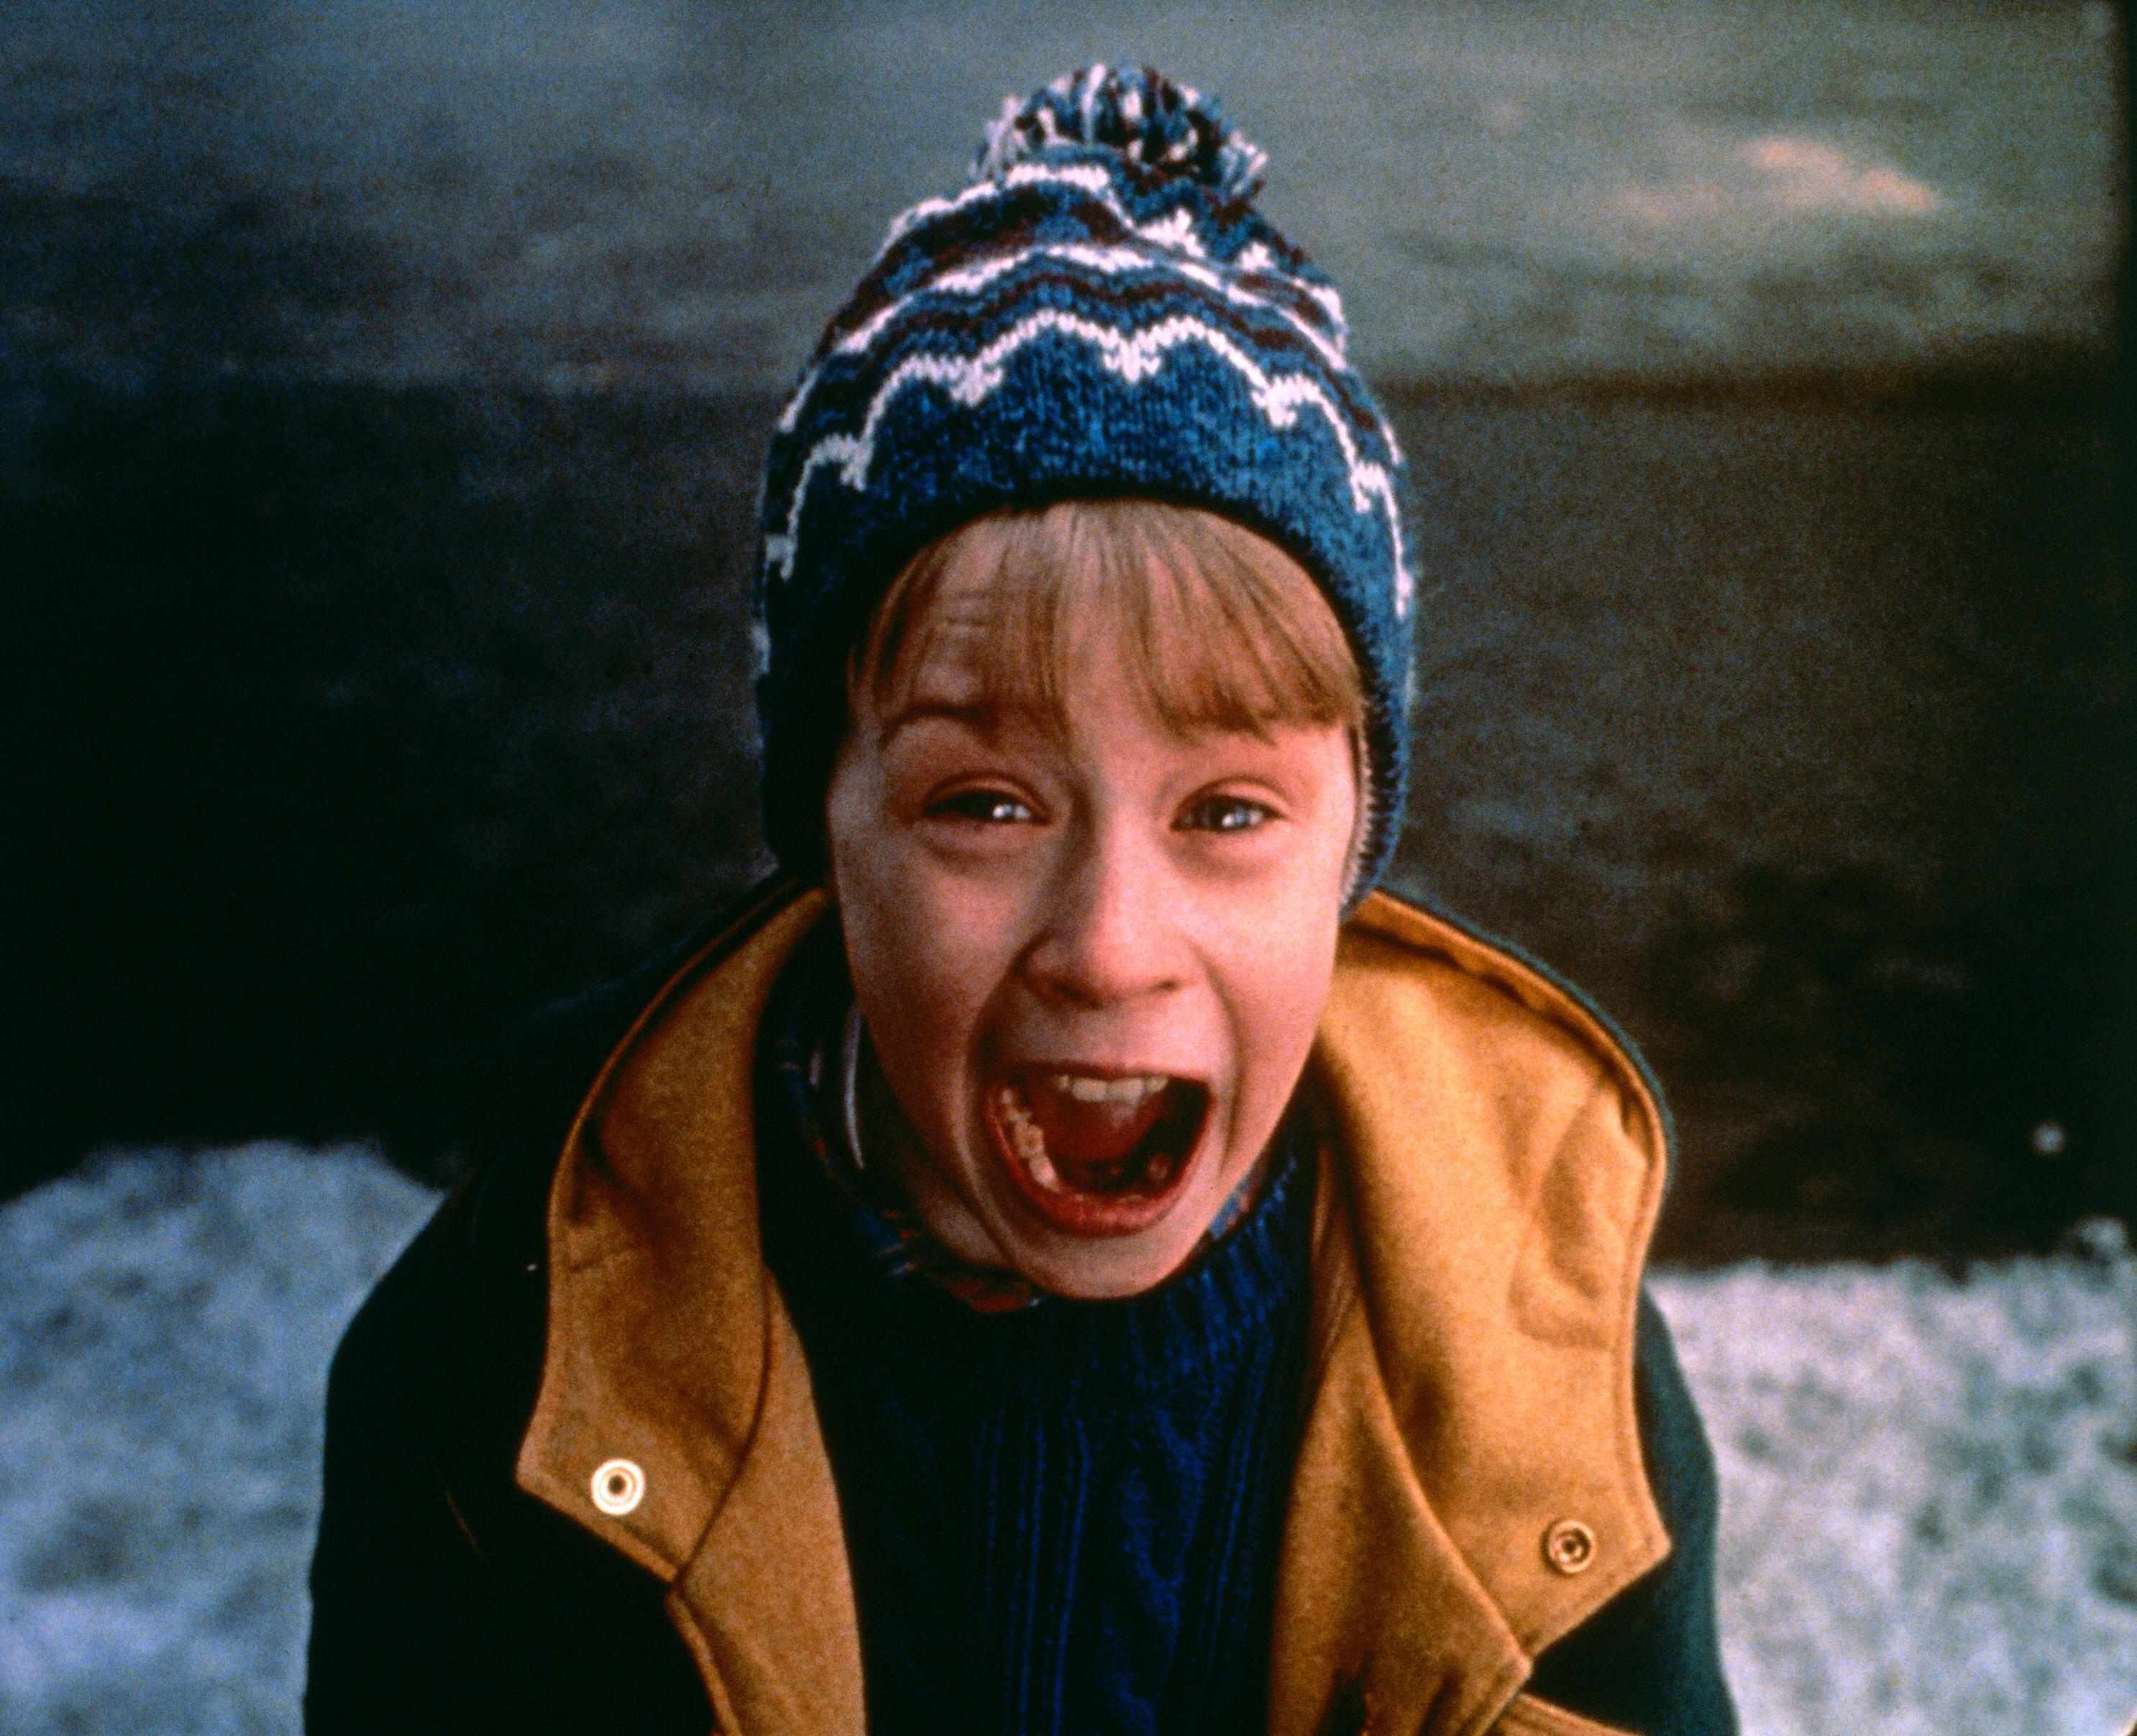 Released in 1990, Home Alone was a massive success and continues to be a holiday staple